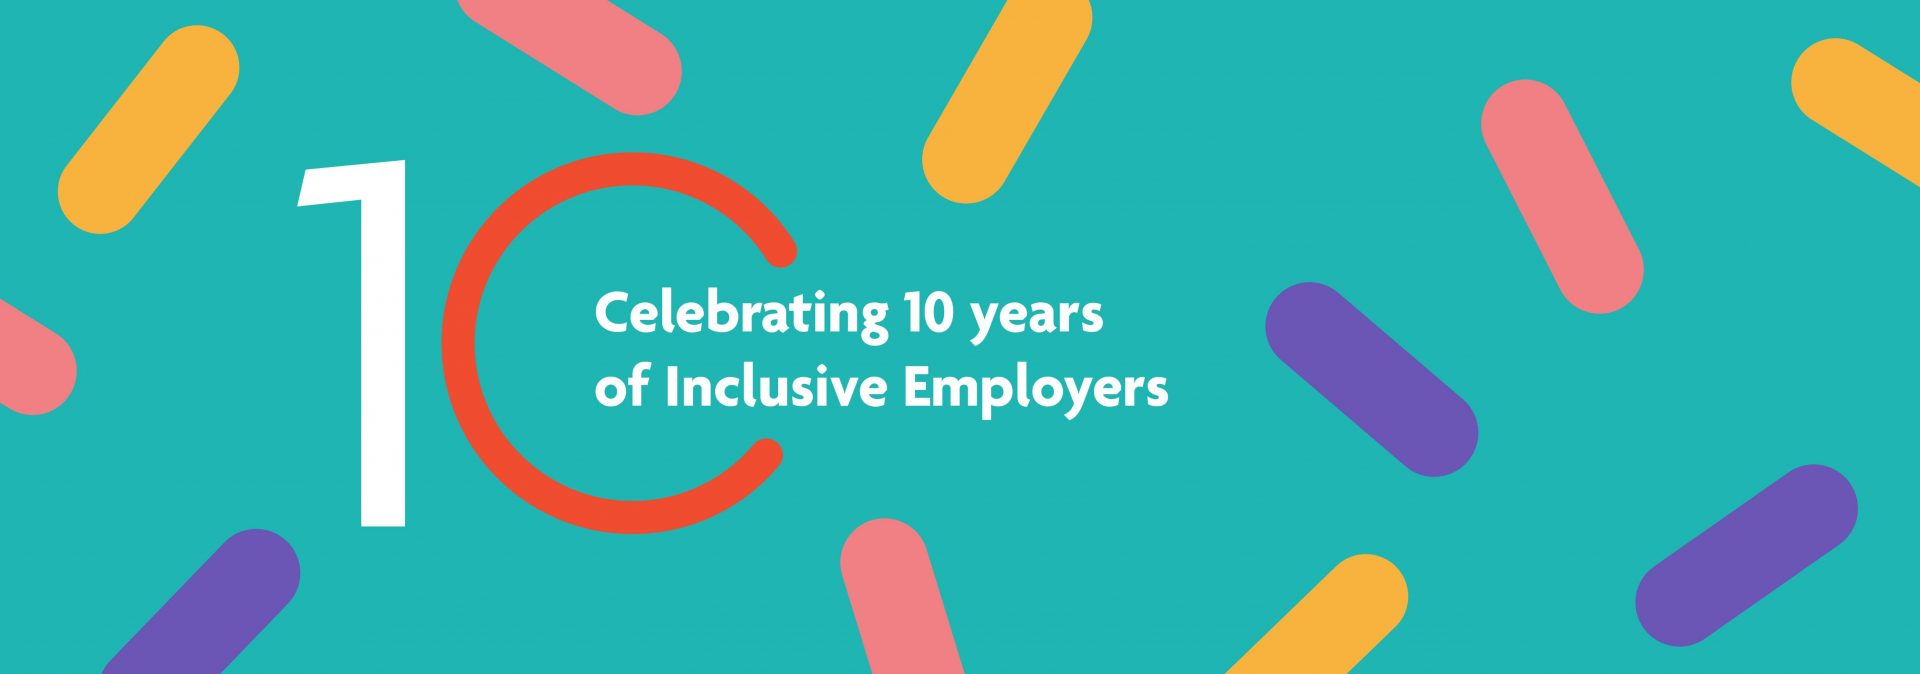 Celebrating 10 years of Inclusive Employers